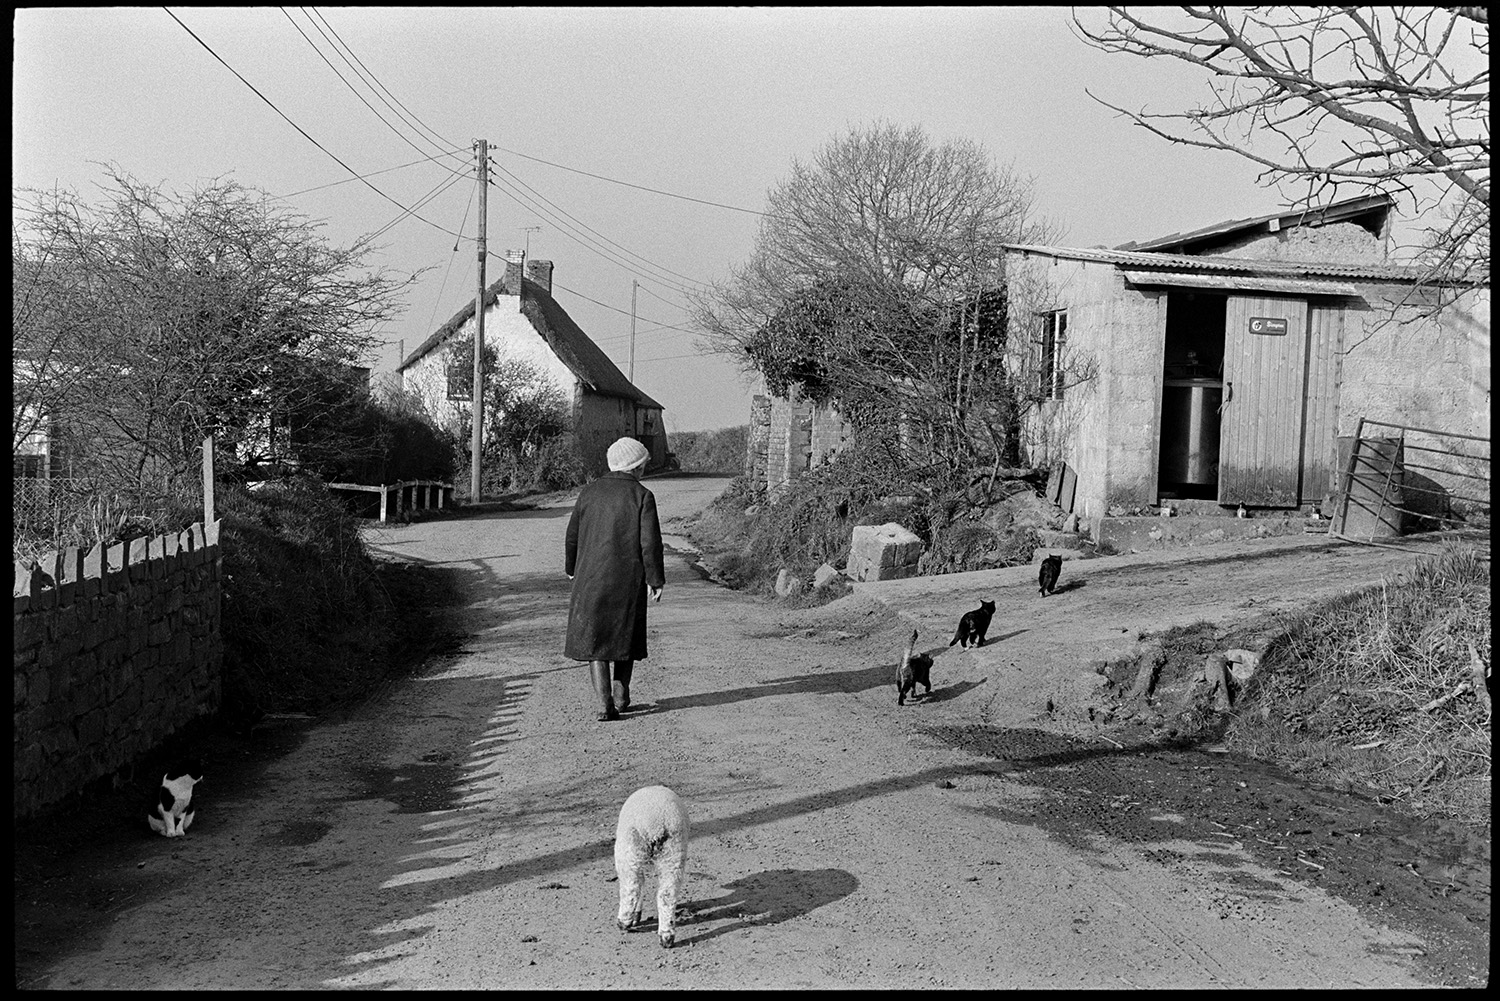 School bus, woman walking dogs. 
[Evelyn Folland walking along a lane past barns, in Upcott, Dolton. A lamb is following her. A cat is sat by the side of the road and three more cats are walking towards a barn. A thatched cottage can be seen in the background.]